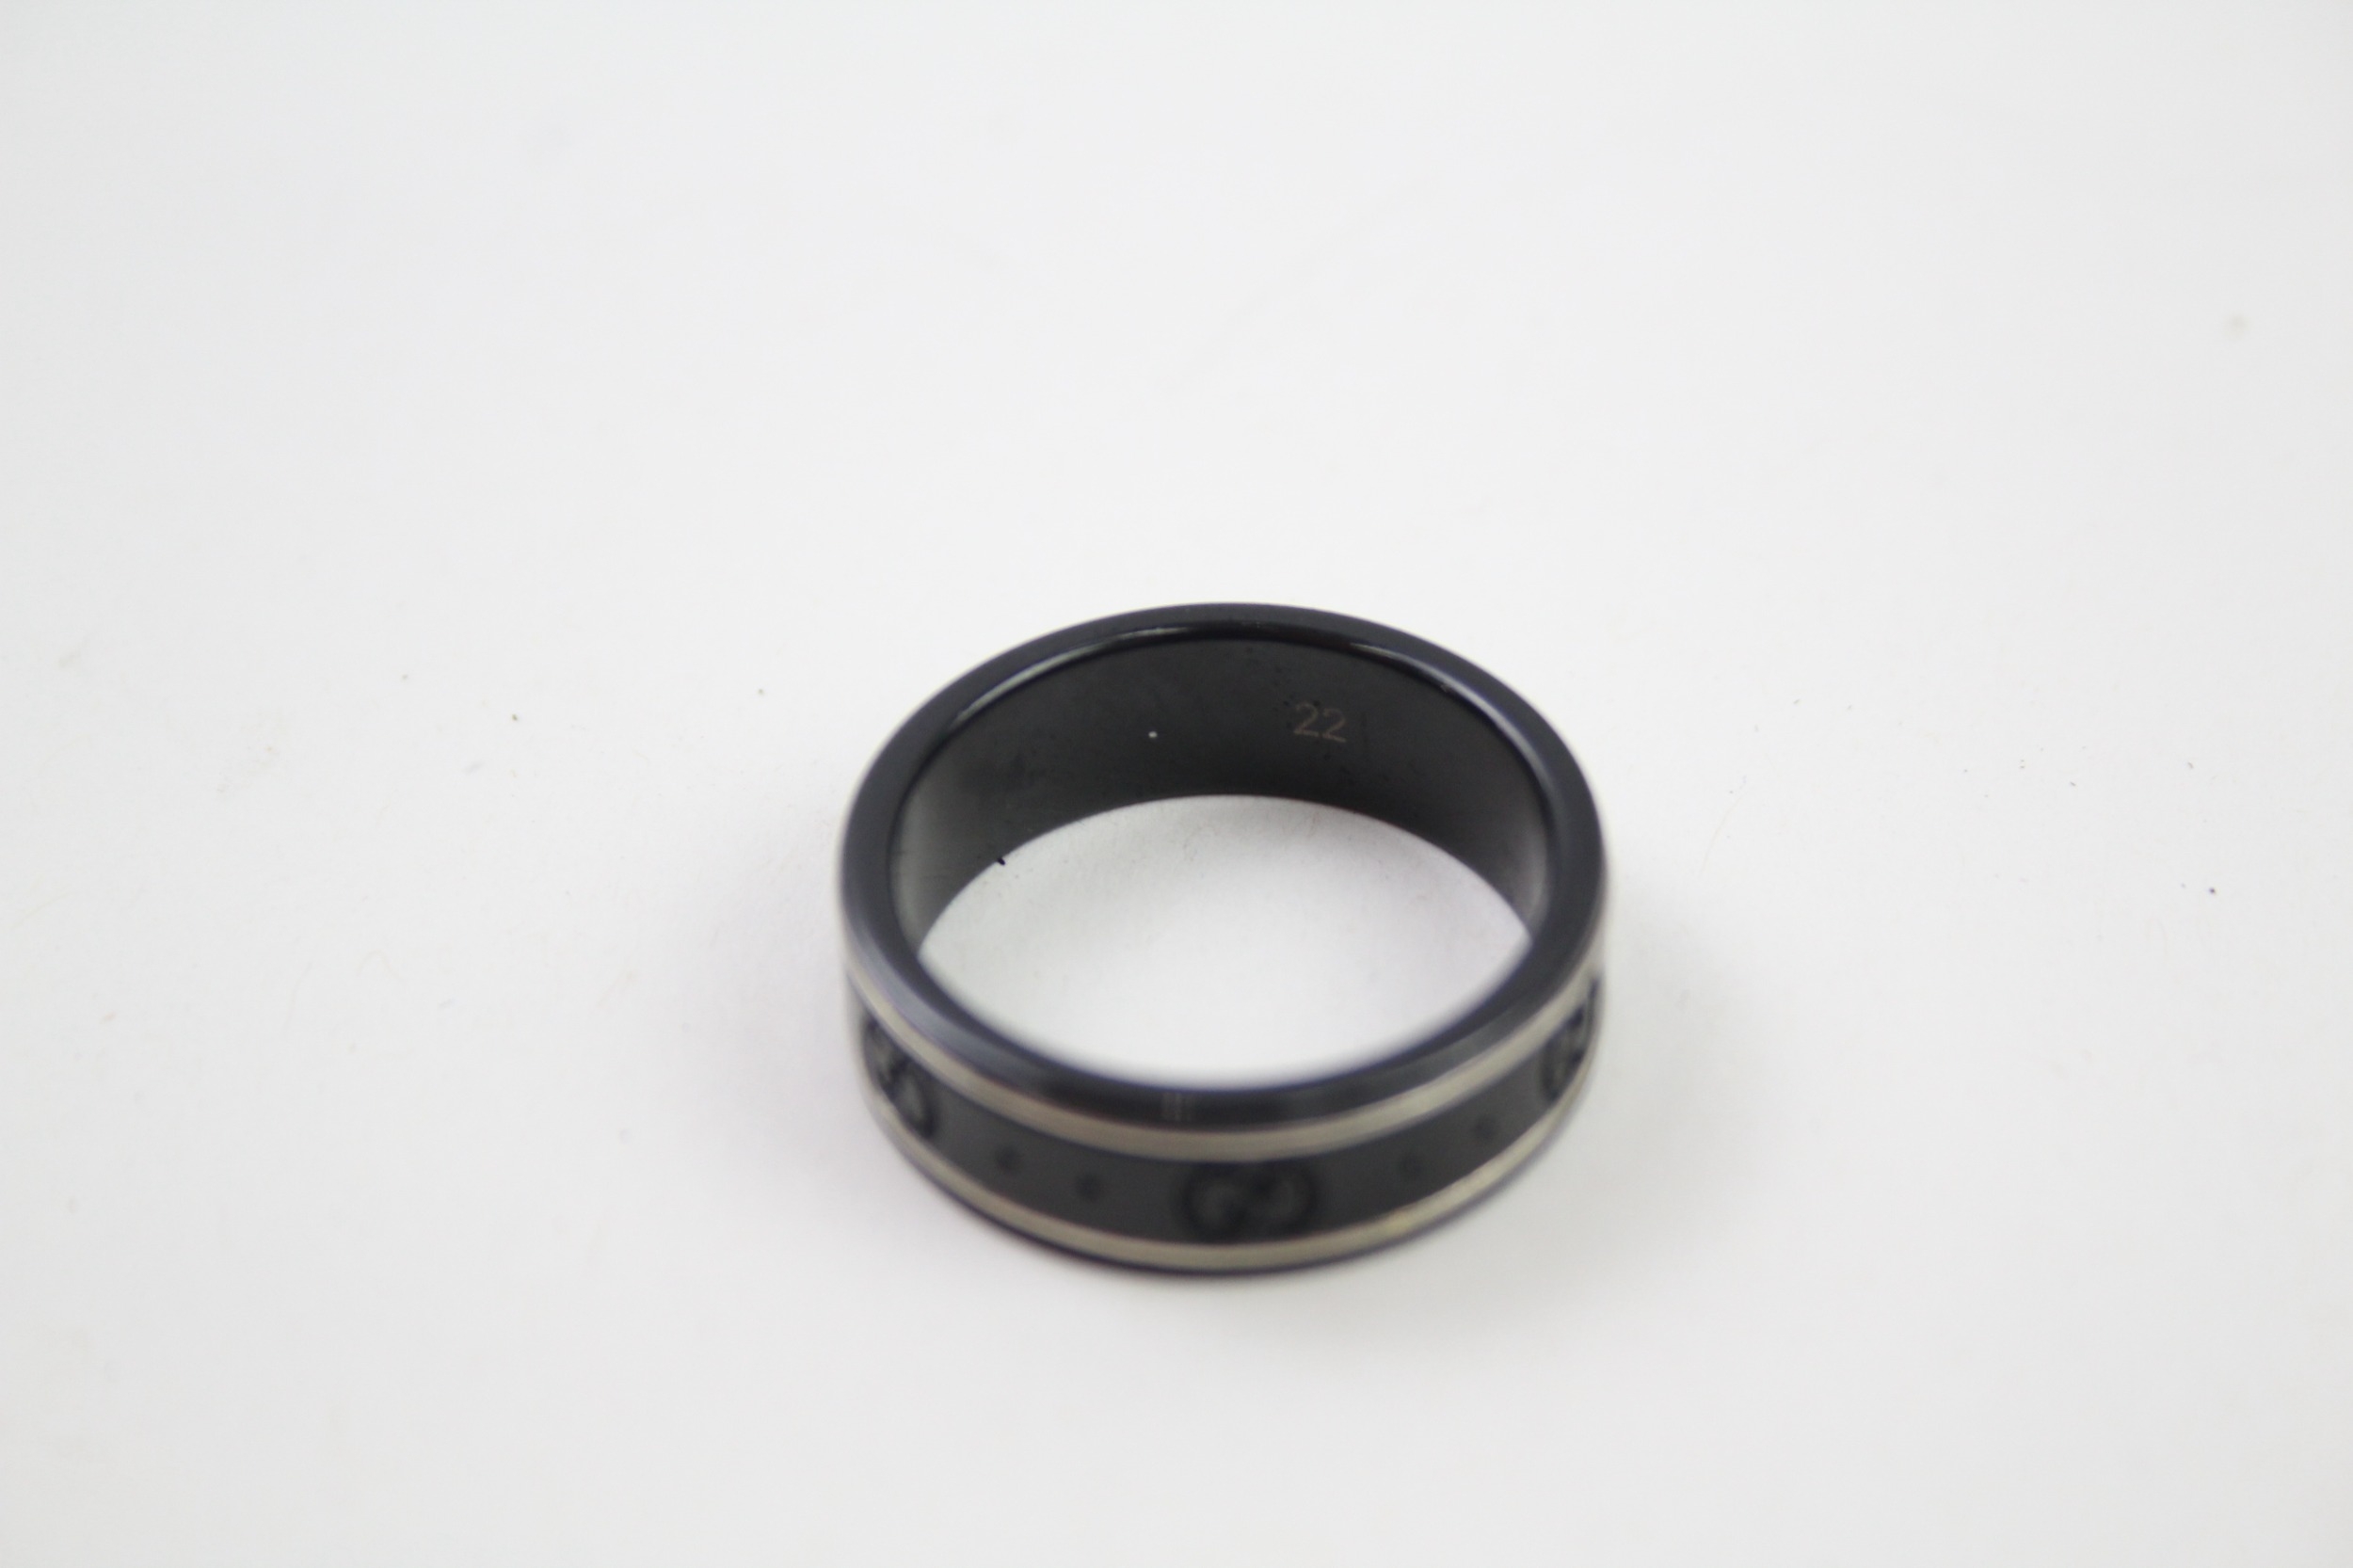 Black band ring by designer Gucci with box (3g) - Image 6 of 8